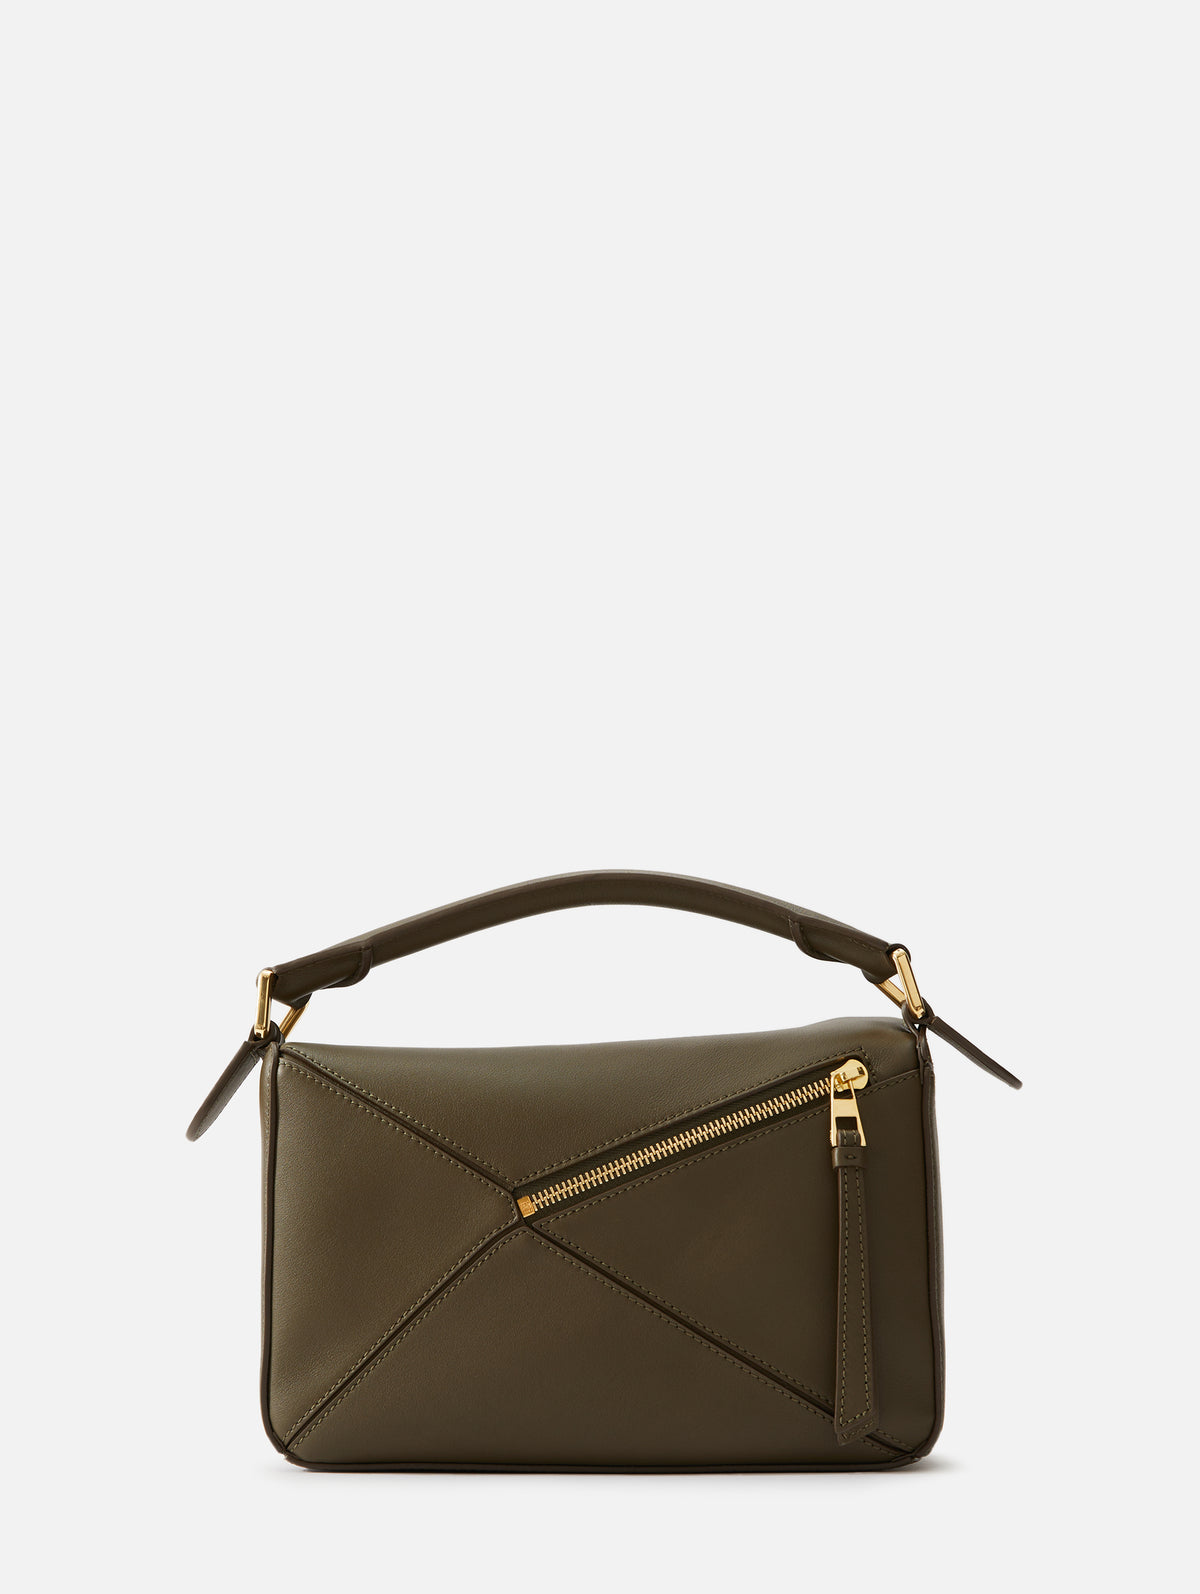 LOEWE Puzzle small leather shoulder bag  Street style bags, Leather  shoulder bag, Bags